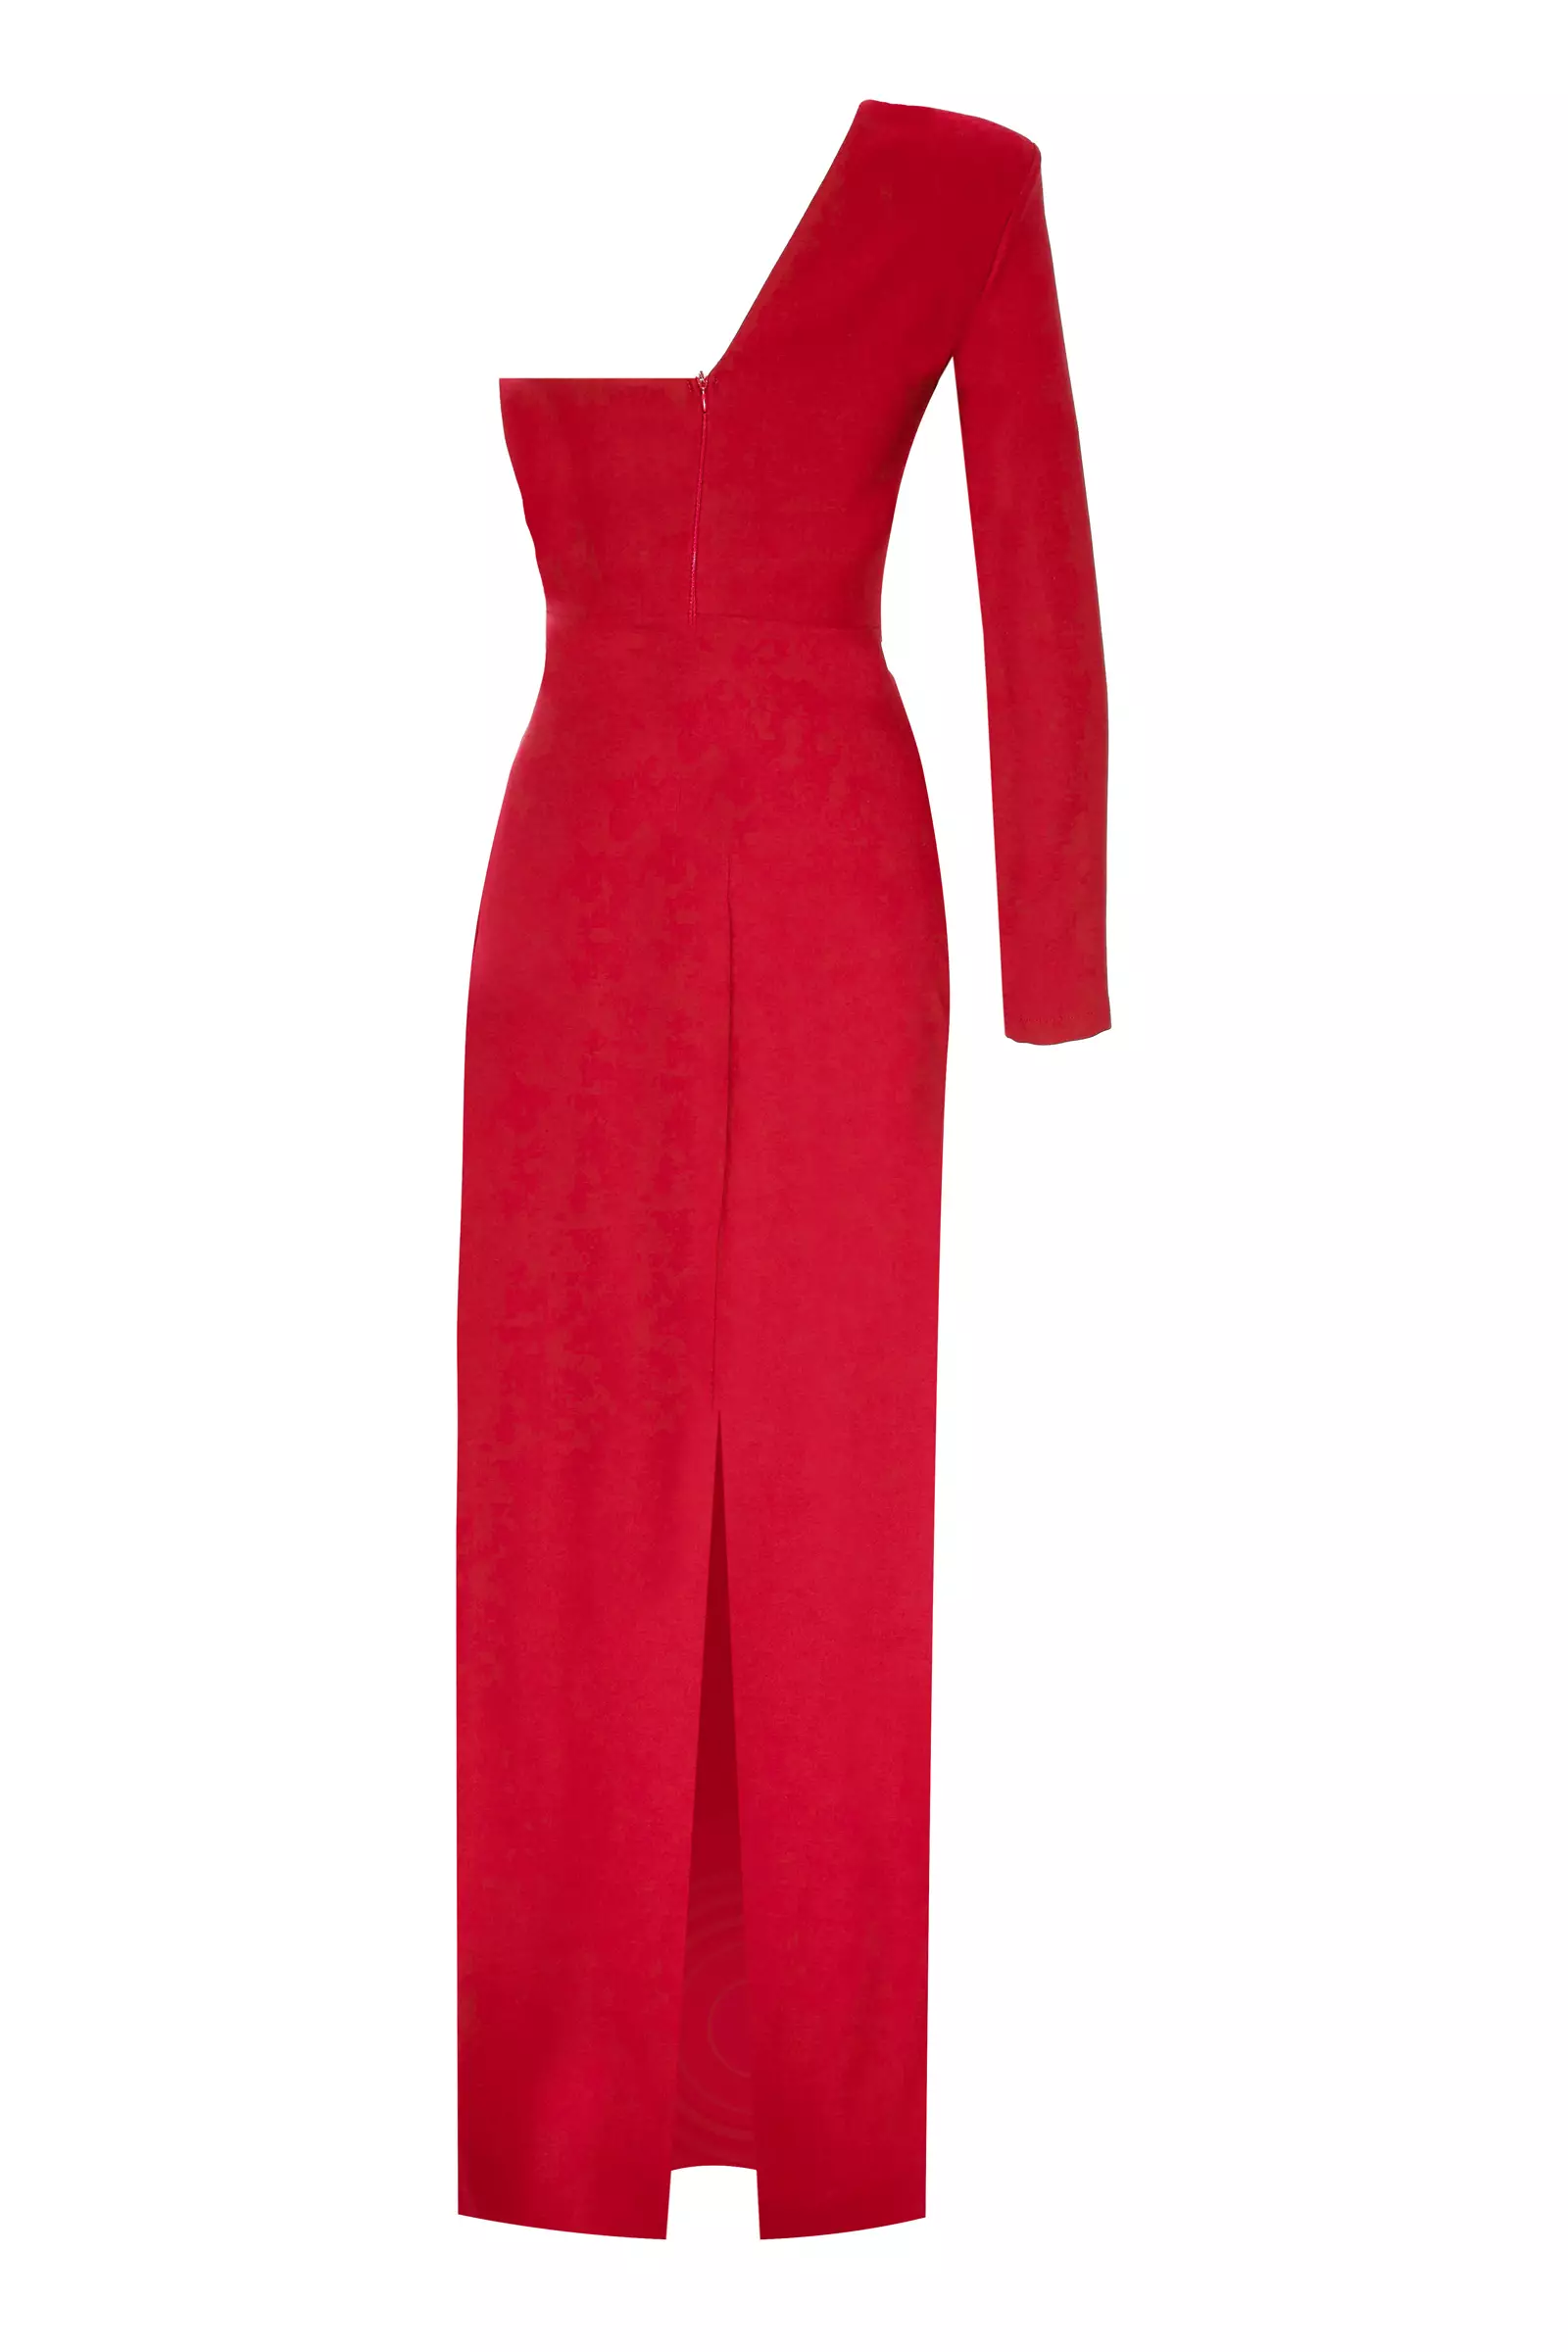 Red crepe one arm maxi dress